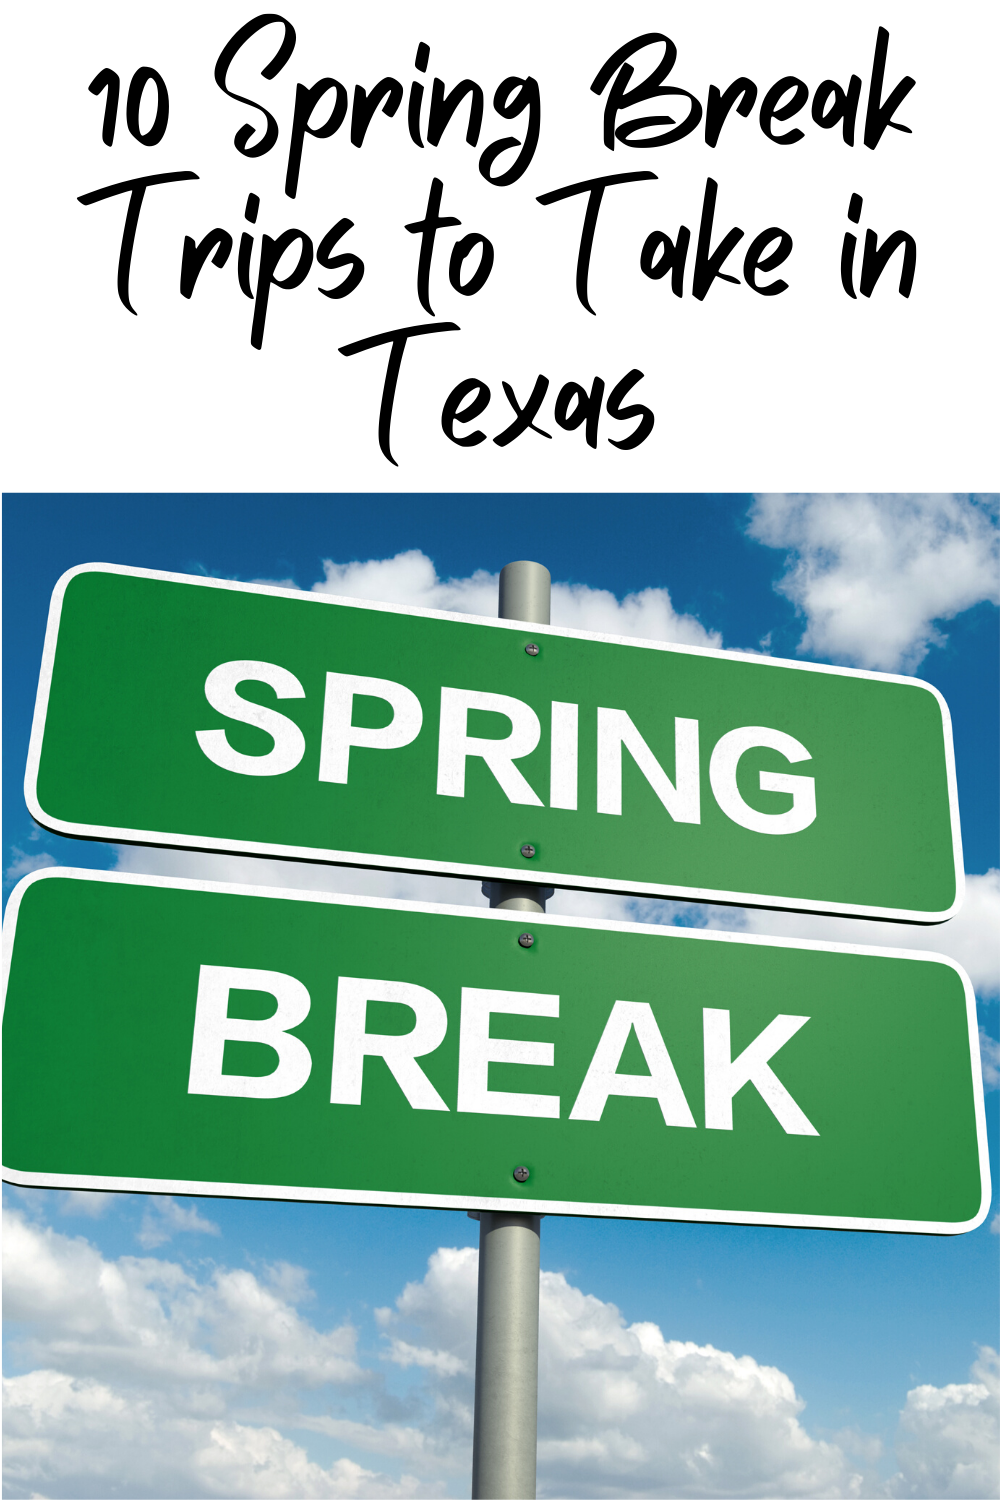 You don't have to travel far and wide to get a great spring break trip on the books. You can do any of these 10 spring break trips to take in Texas for an equally fun option that is closer to home.